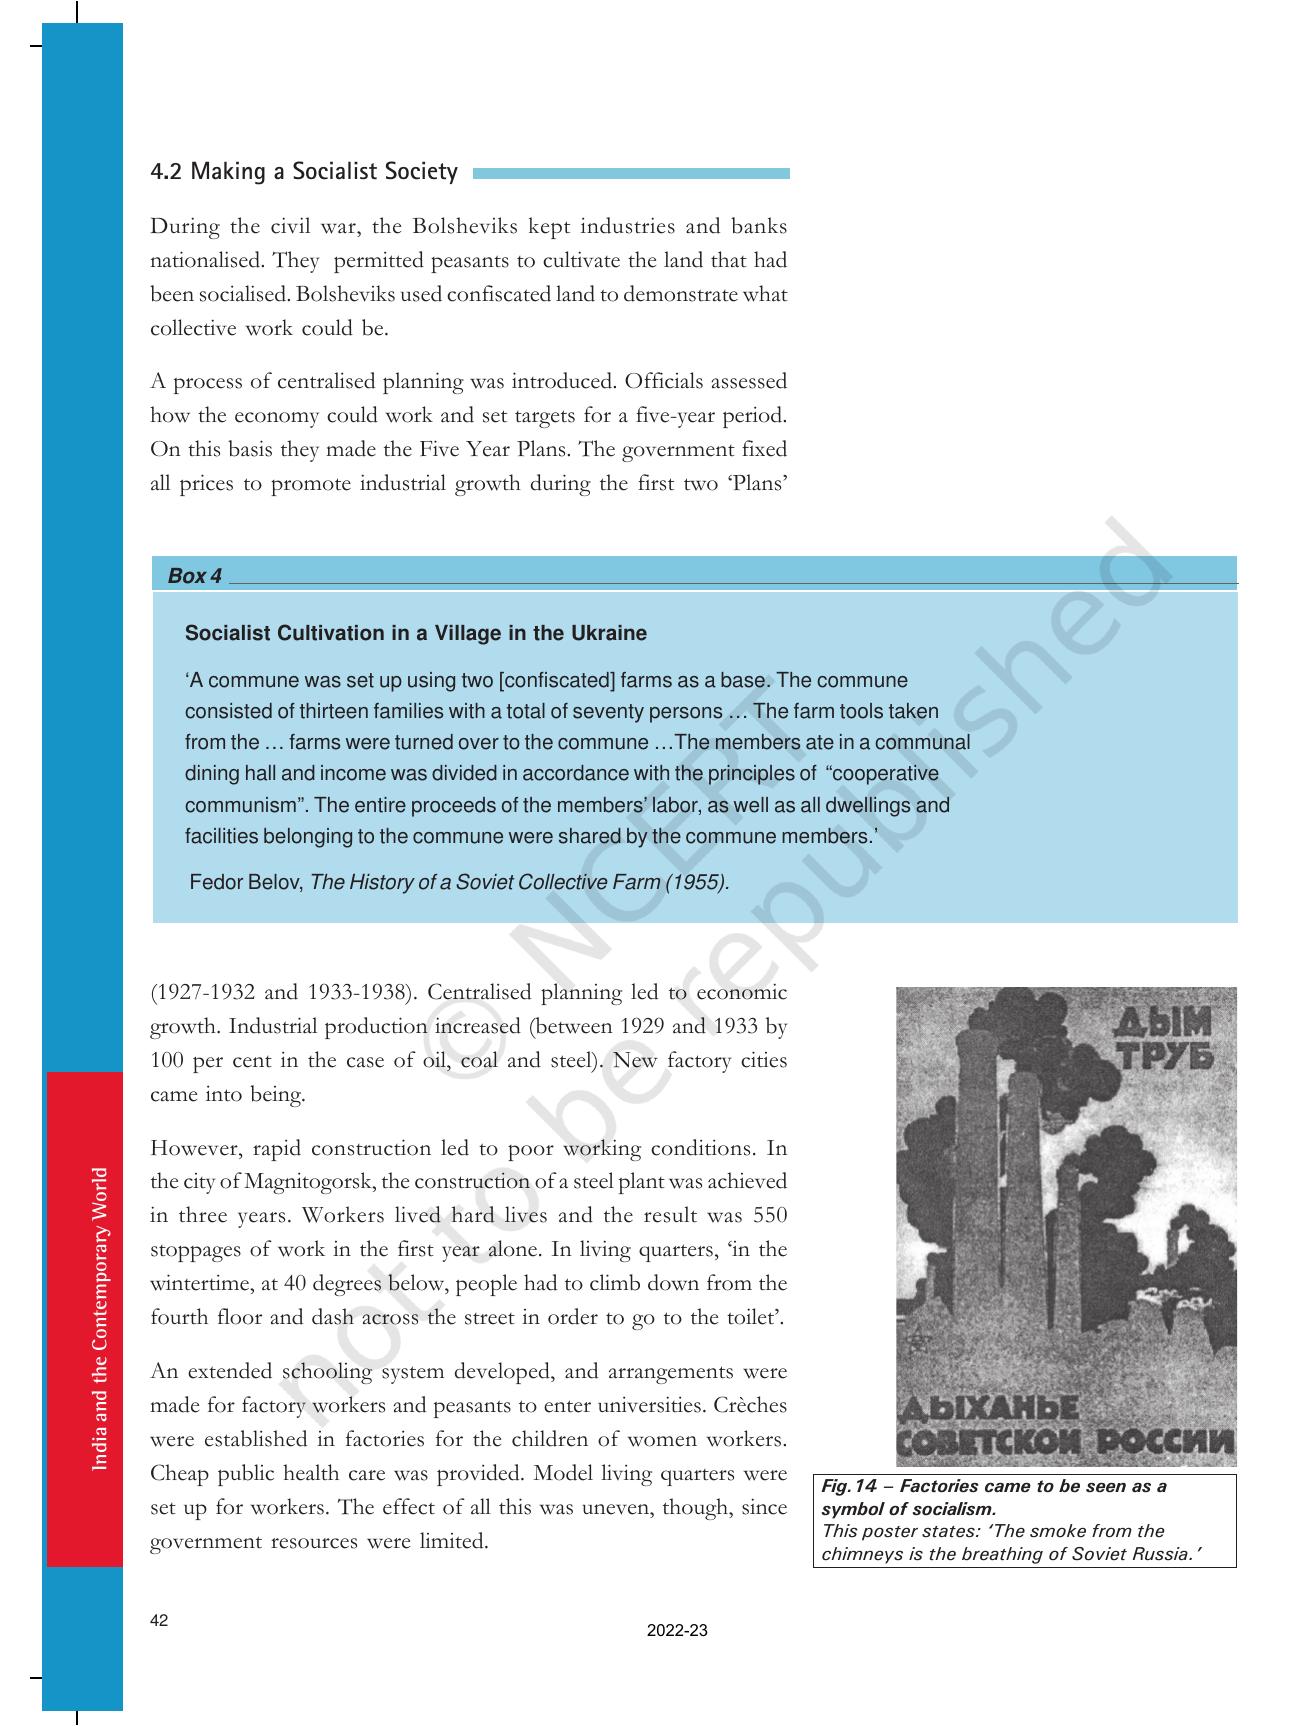 NCERT Book for Class 9 History Chapter 2 Socialism in Europe and the Russian Revolution - Page 18